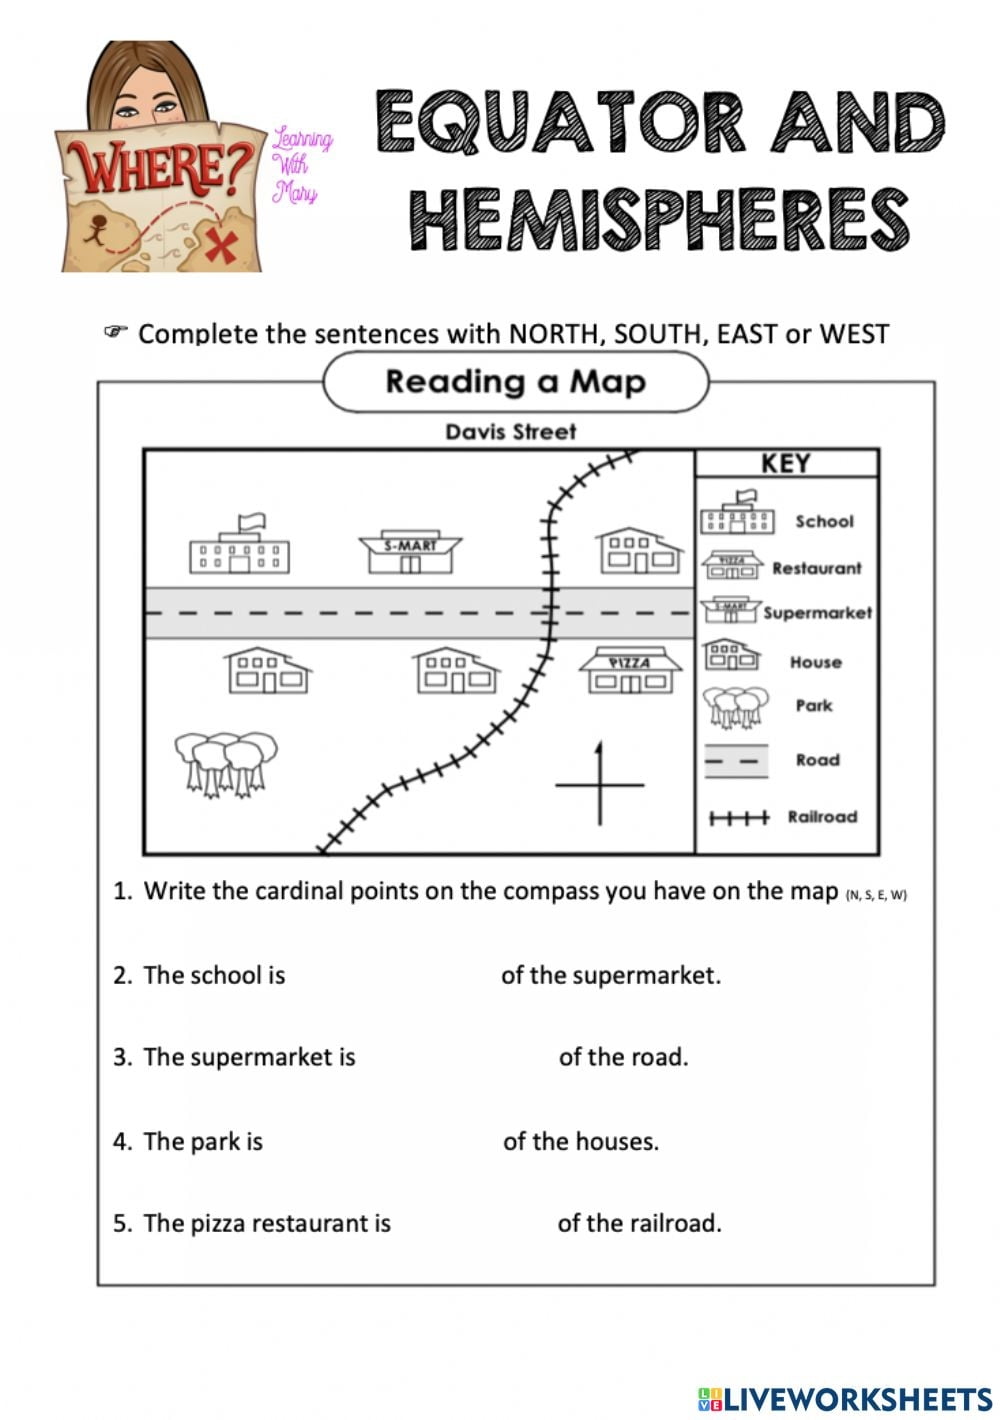 Reading A Map Worksheet Answer Key